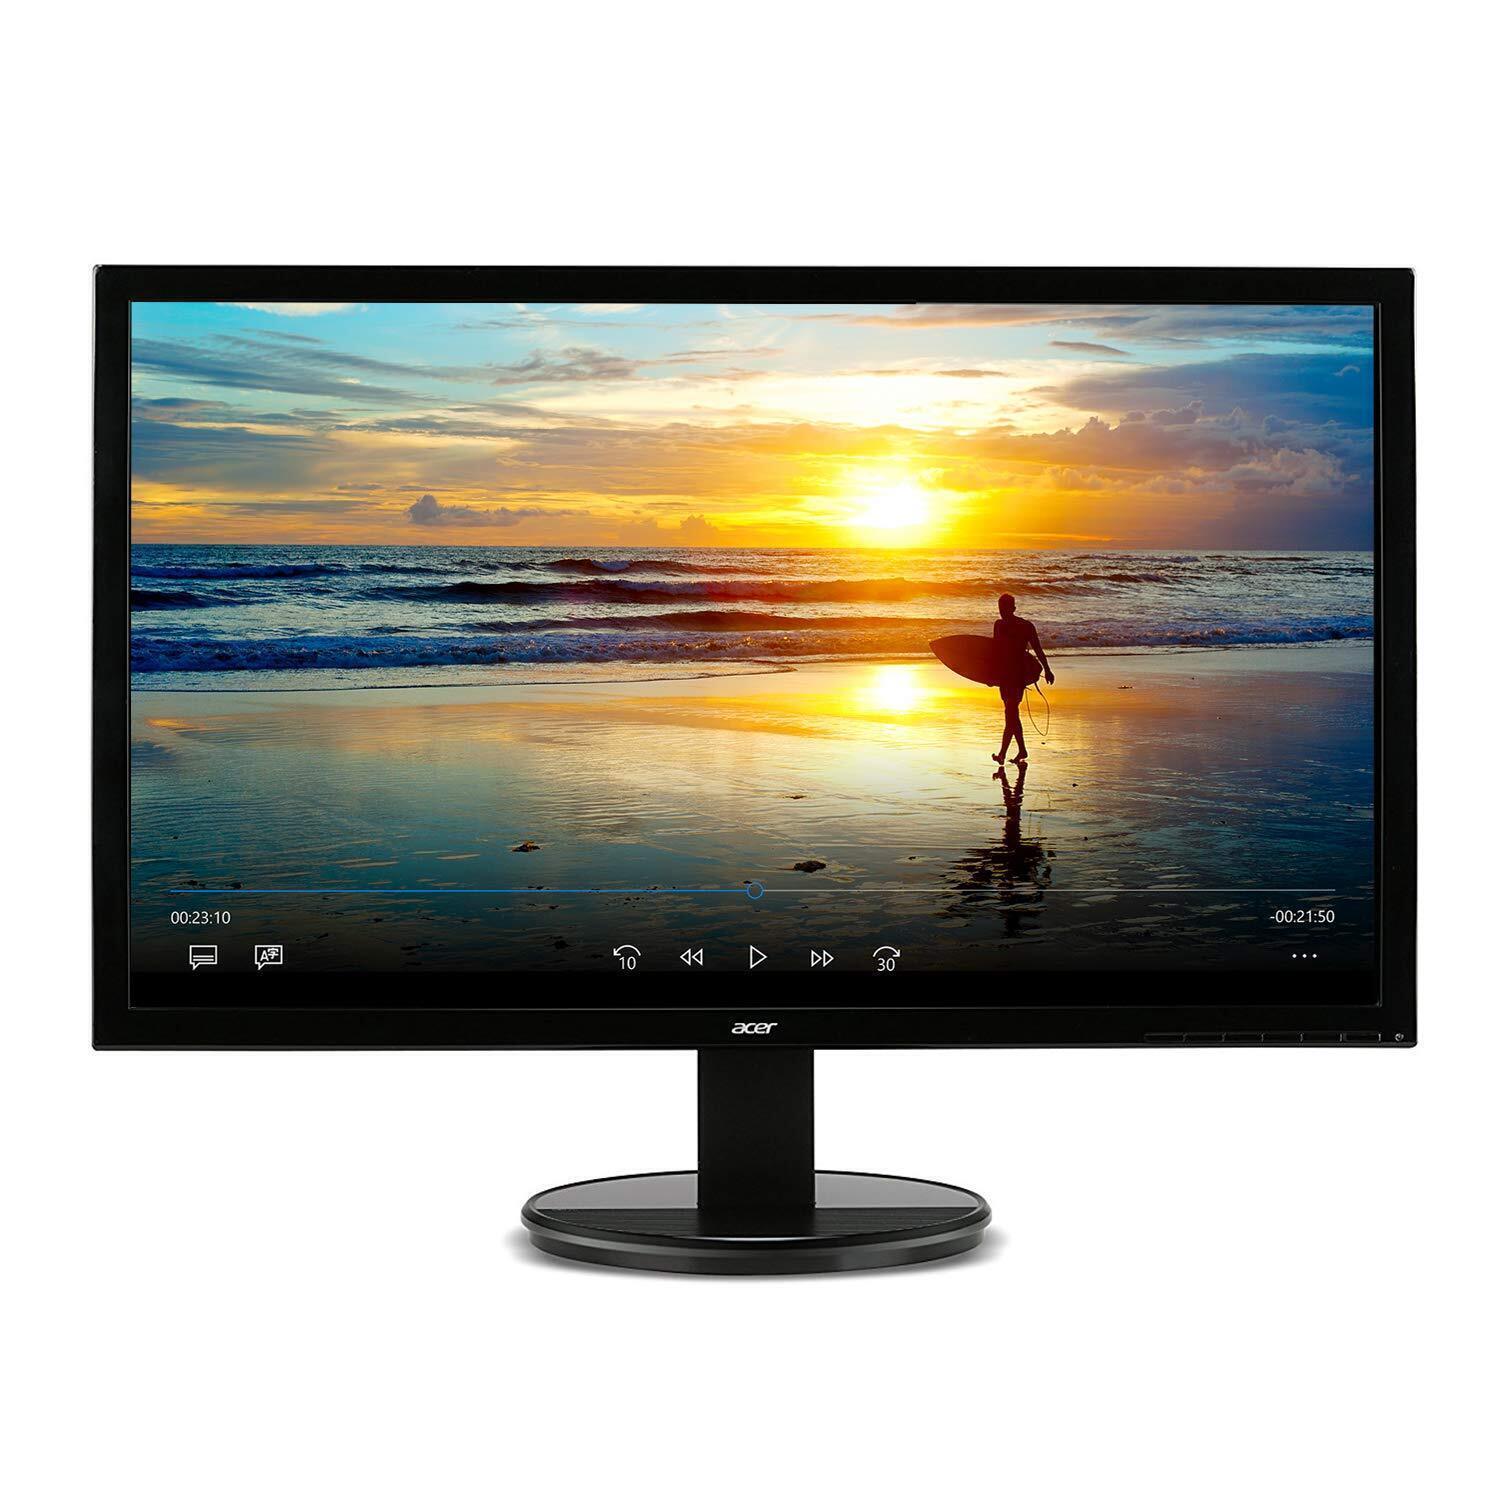 Acer K202HQL 19.5 inch Widescreen LCD LED Monitor